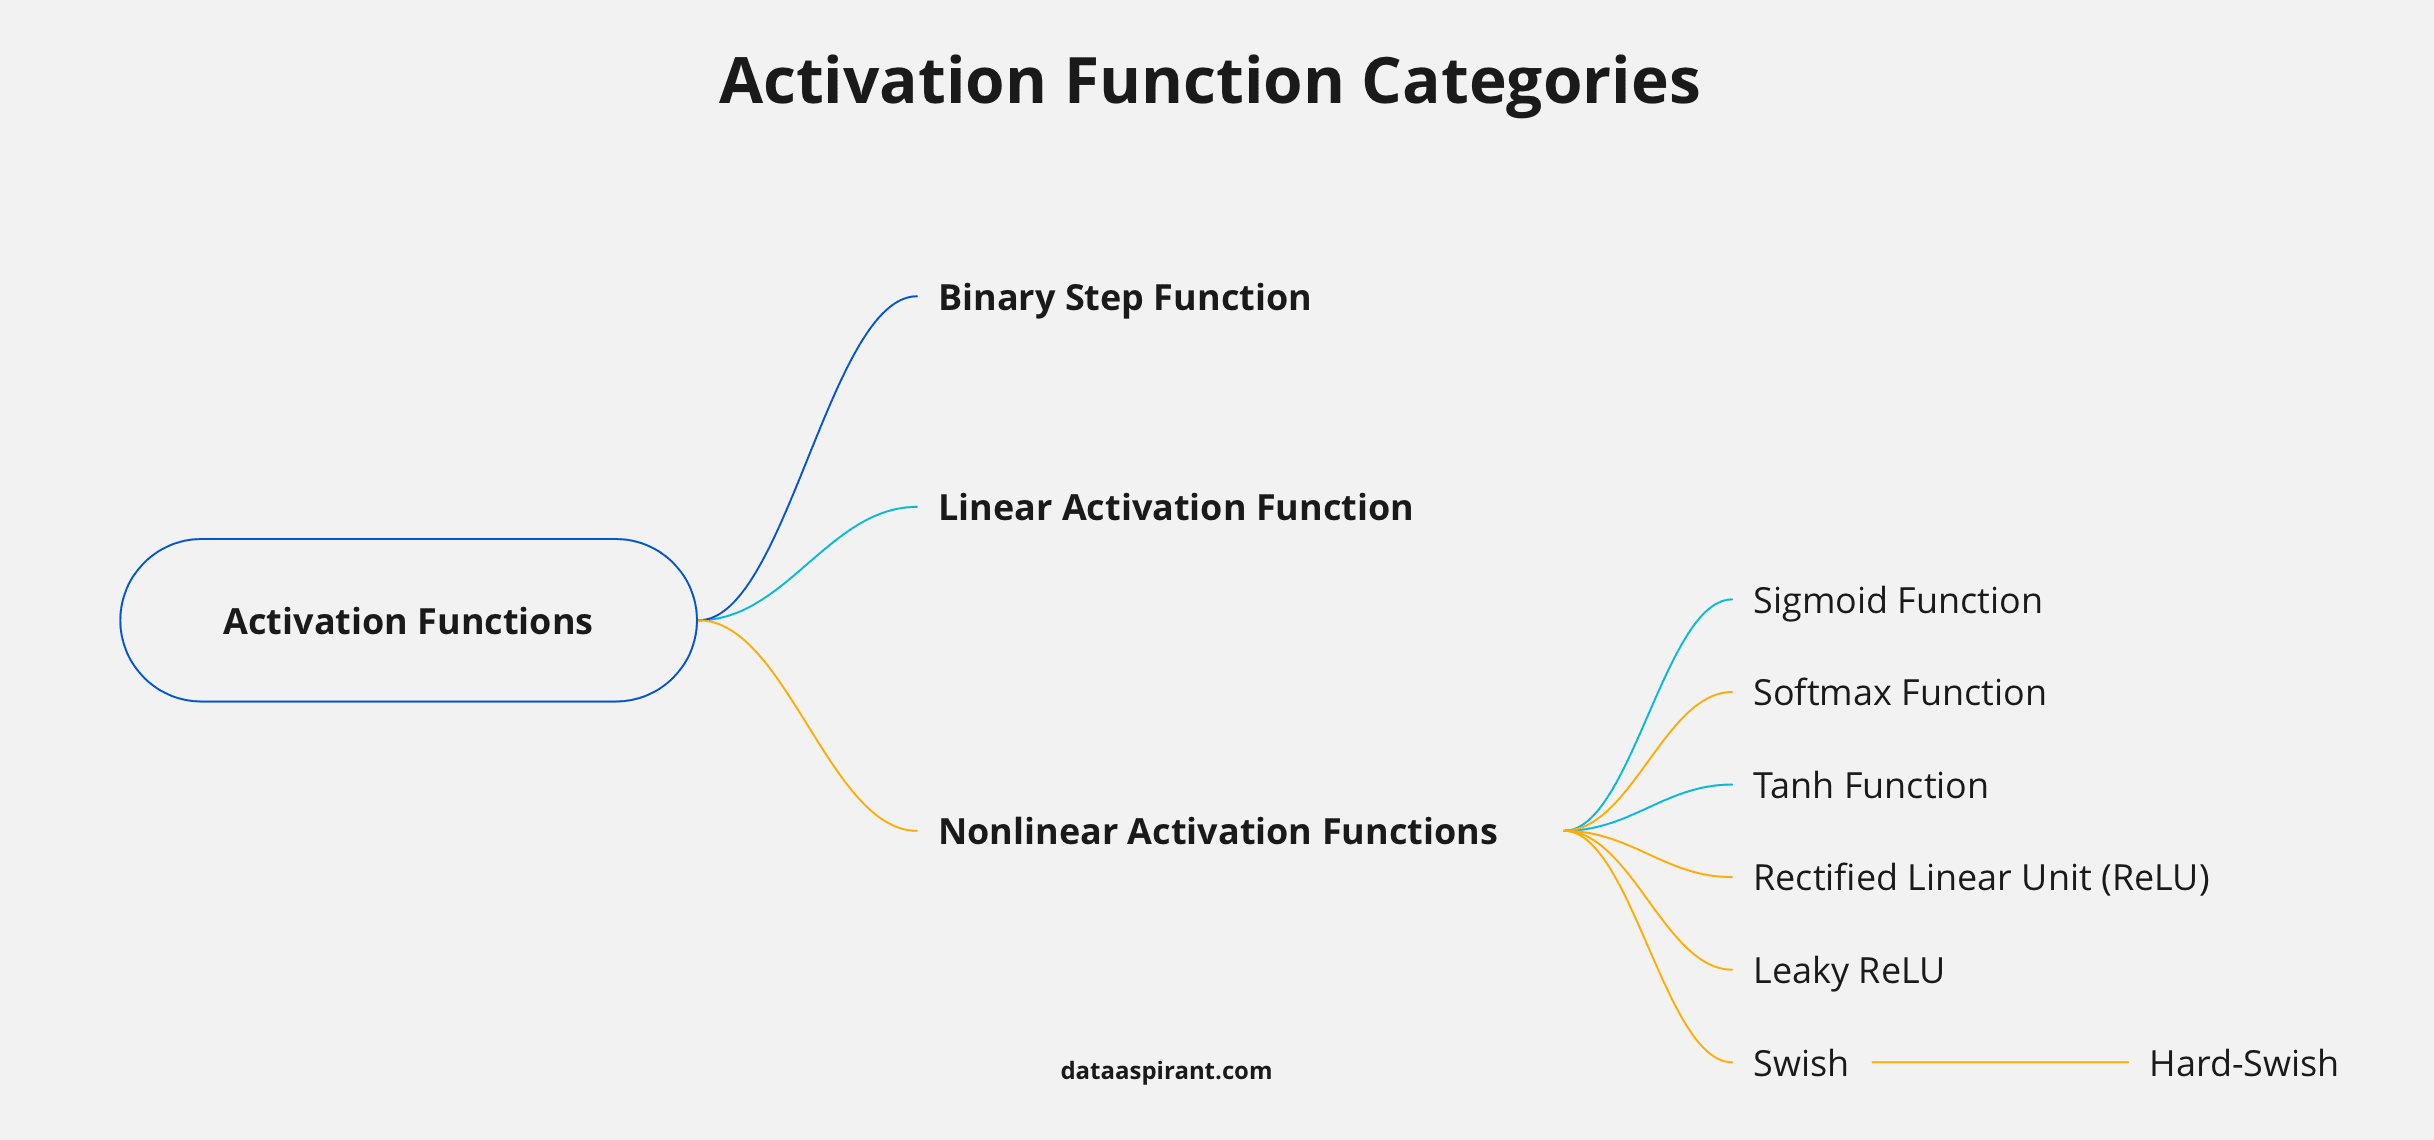 Activation Function Categories